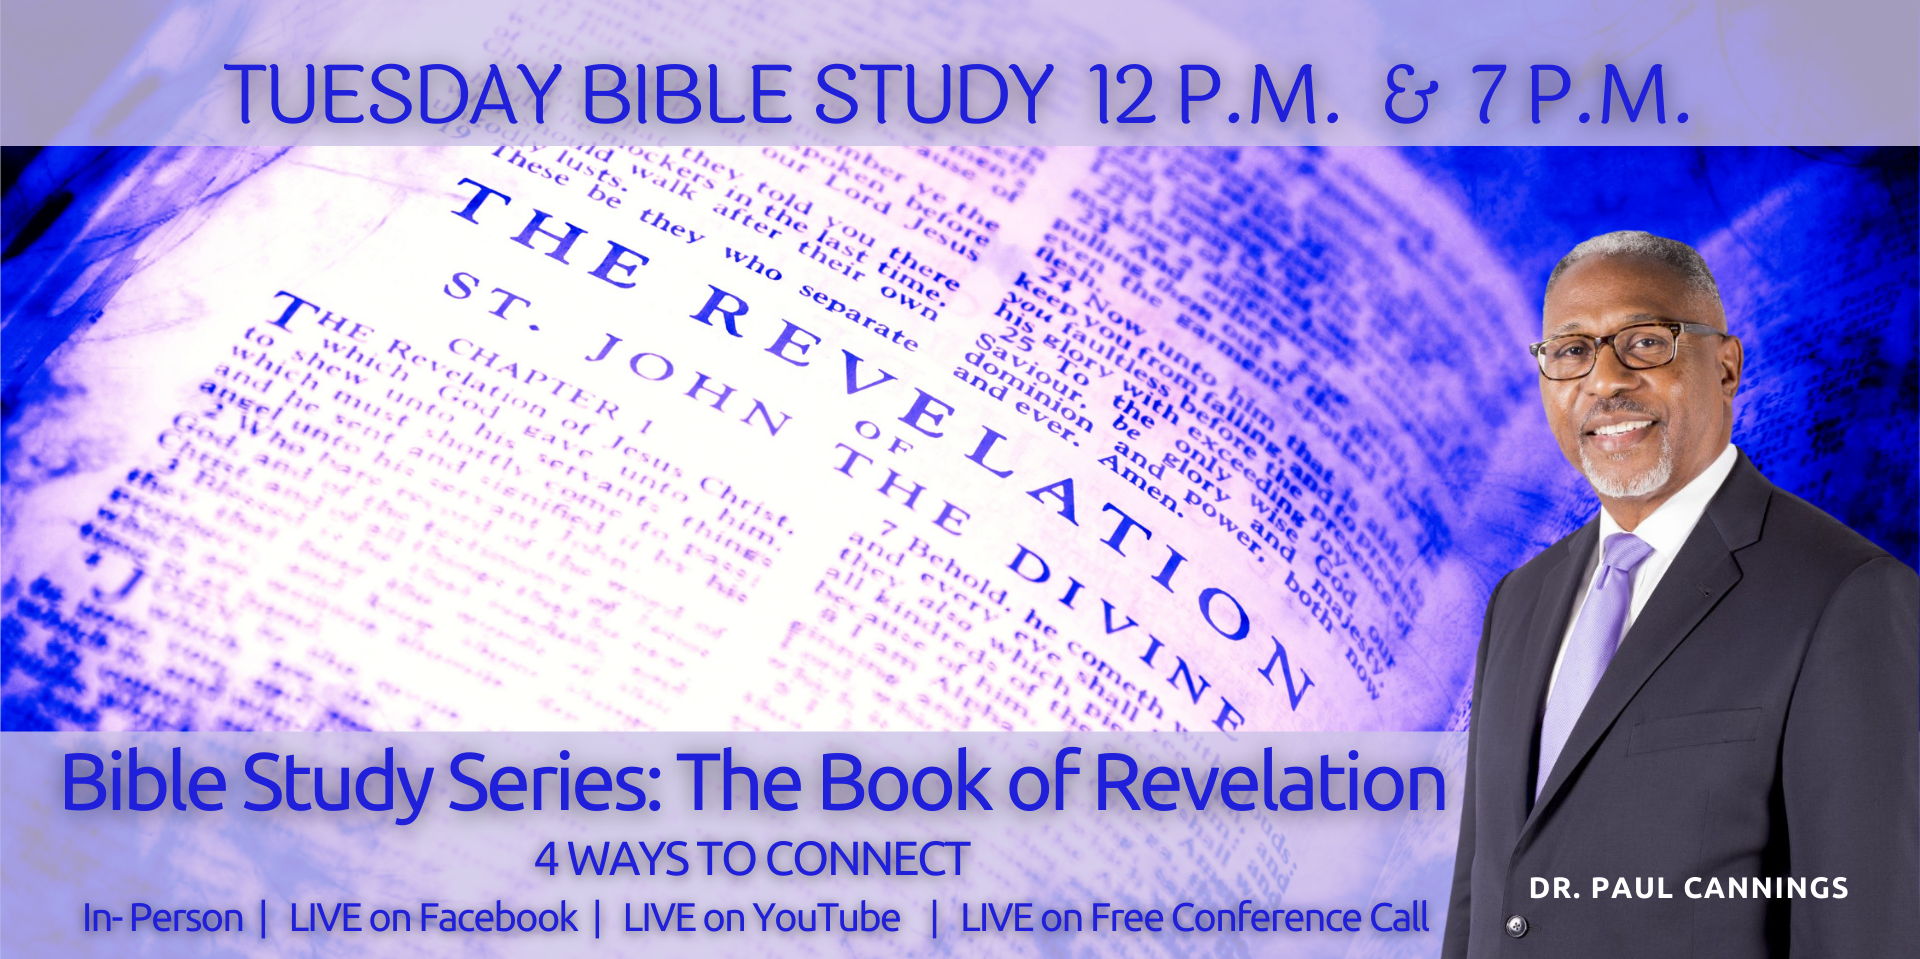 Tuesday Bible Study Series - The Book of Revelation promotional image